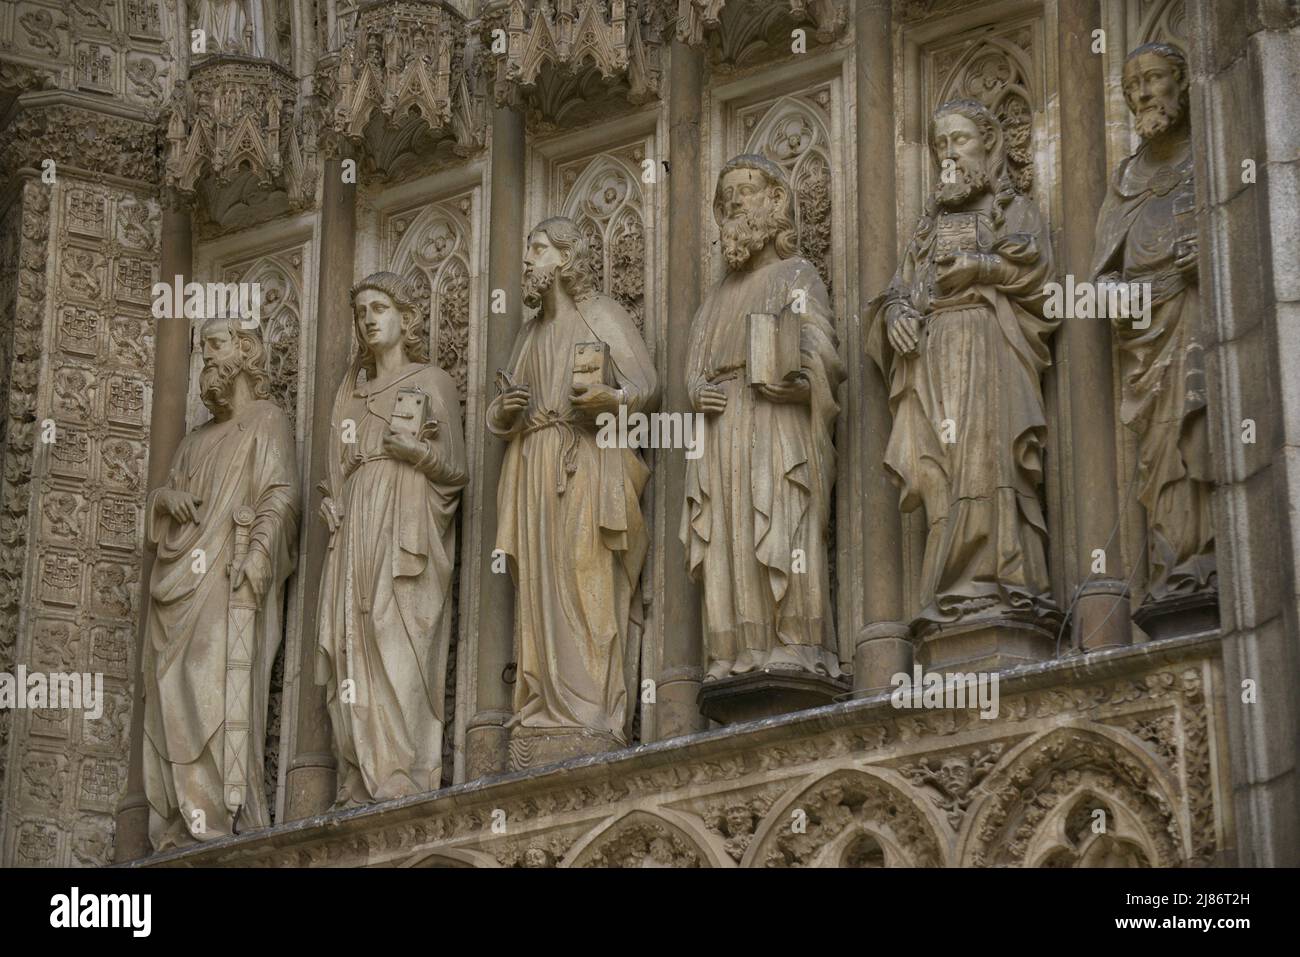 Spain, Castile-La Mancha, Toledo. Cathedral of Saint Mary. Built in Gothic style between 1227 and 1493. Main facade. Gate of Forgiveness. Built under the direction of the architect Alvar Martínez (active between 1418 and 1440). Detail of the sculptures of the apostolate in the jambs. Stock Photo